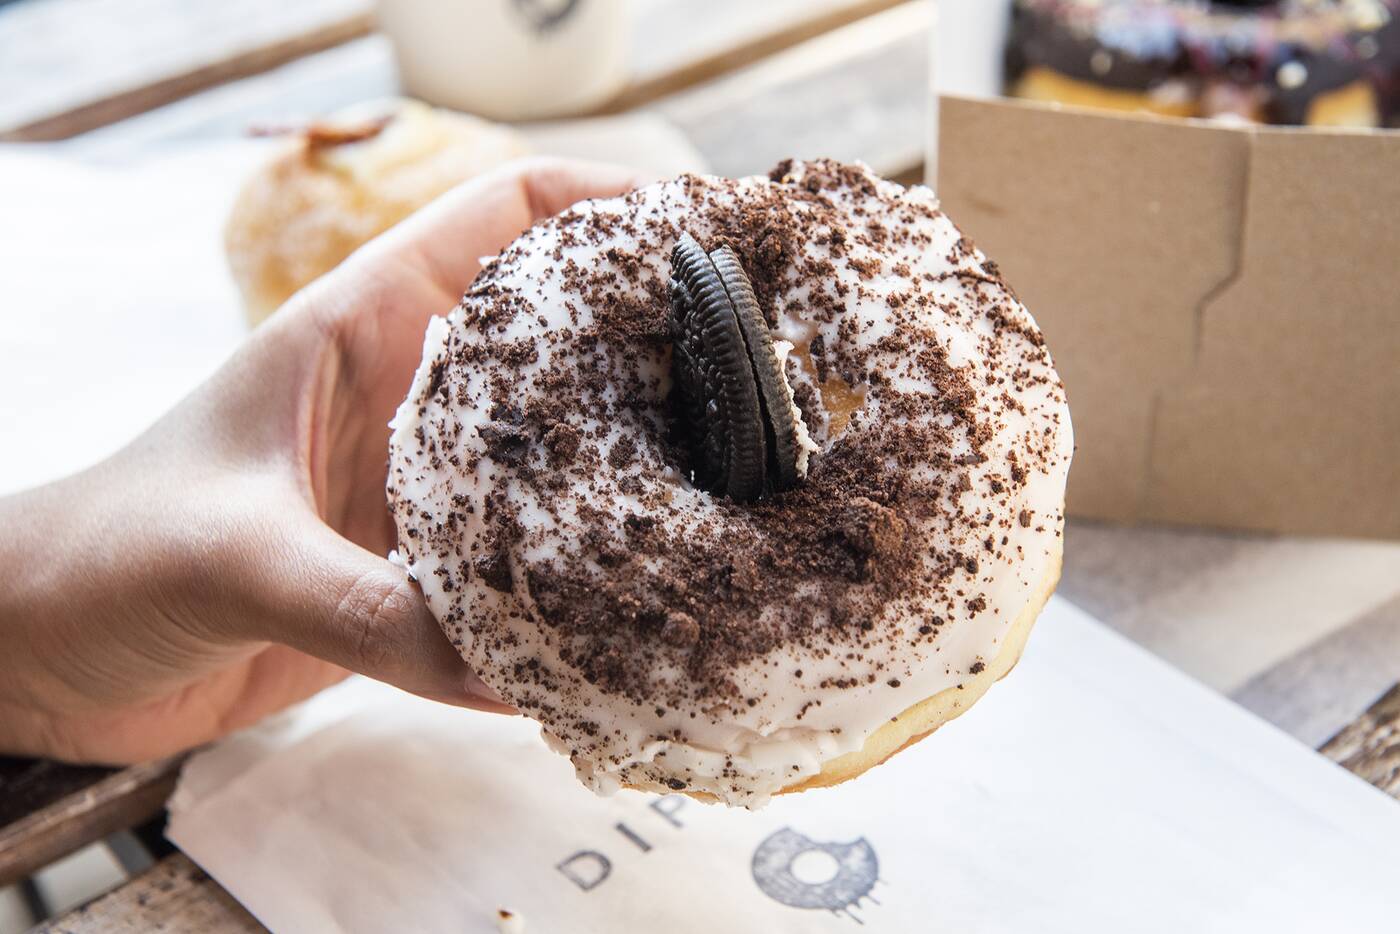 Dipped Donuts Toronto